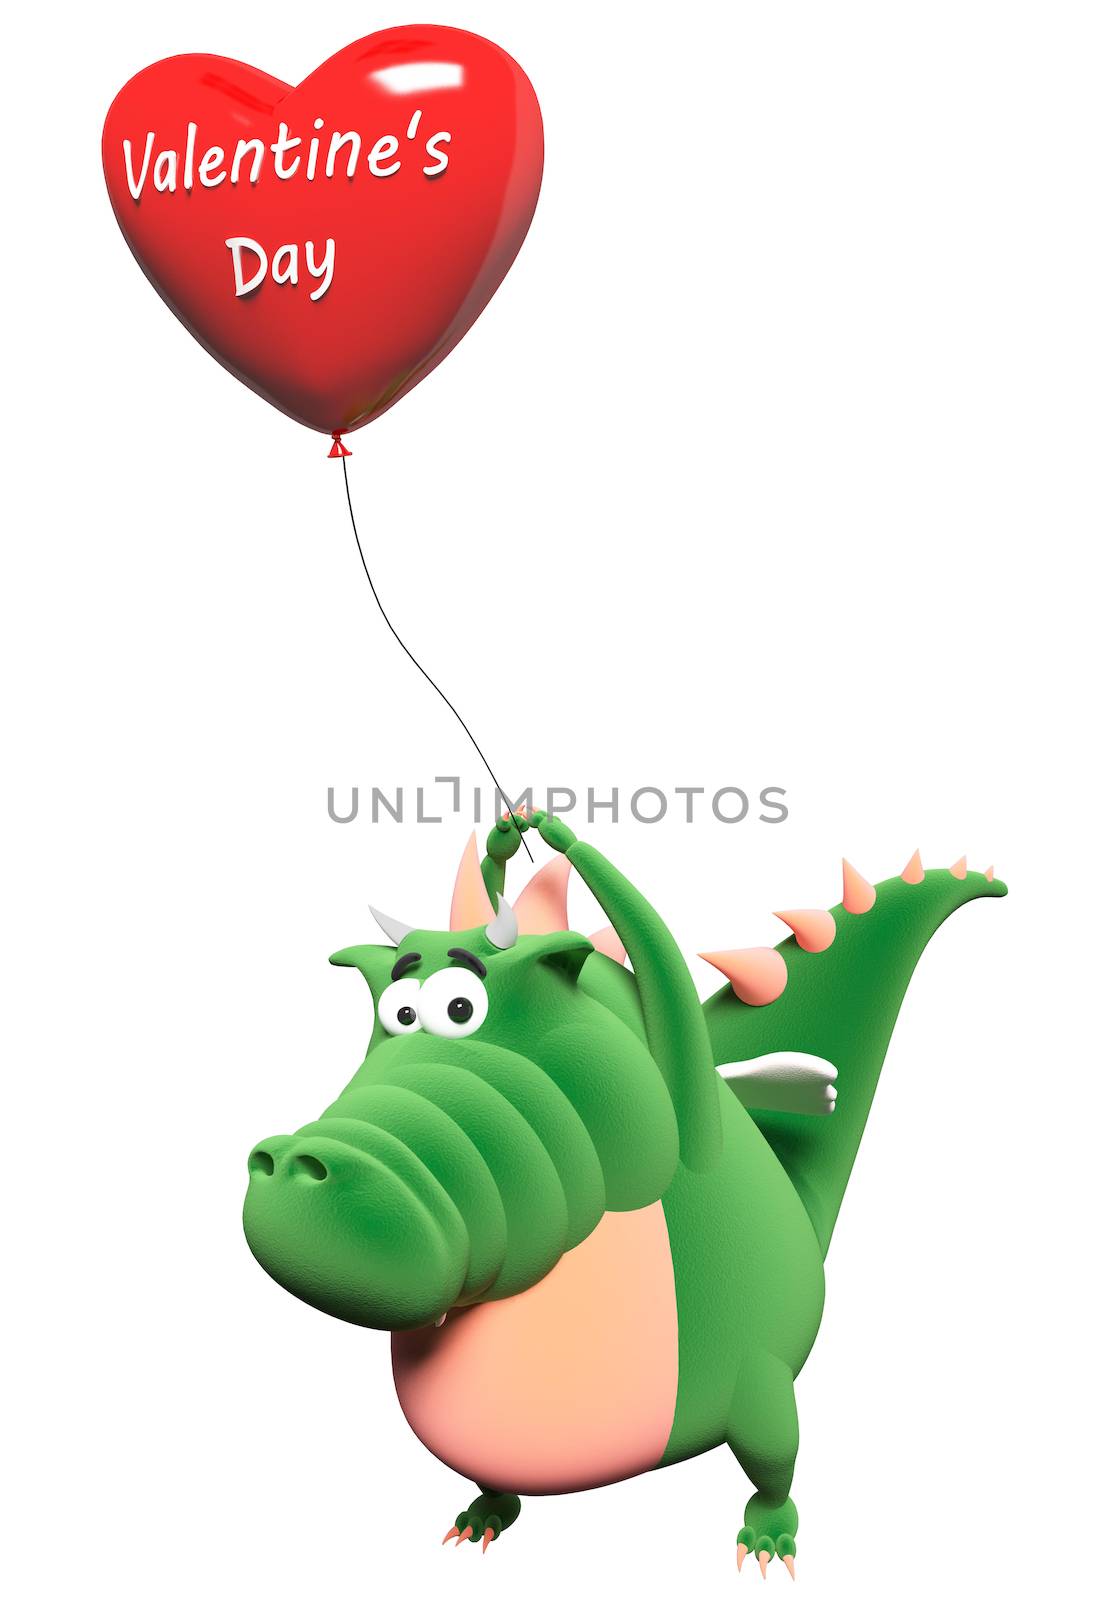 Green dragon and big red heart-balloon with text "Valentine's day", isolated on white backround